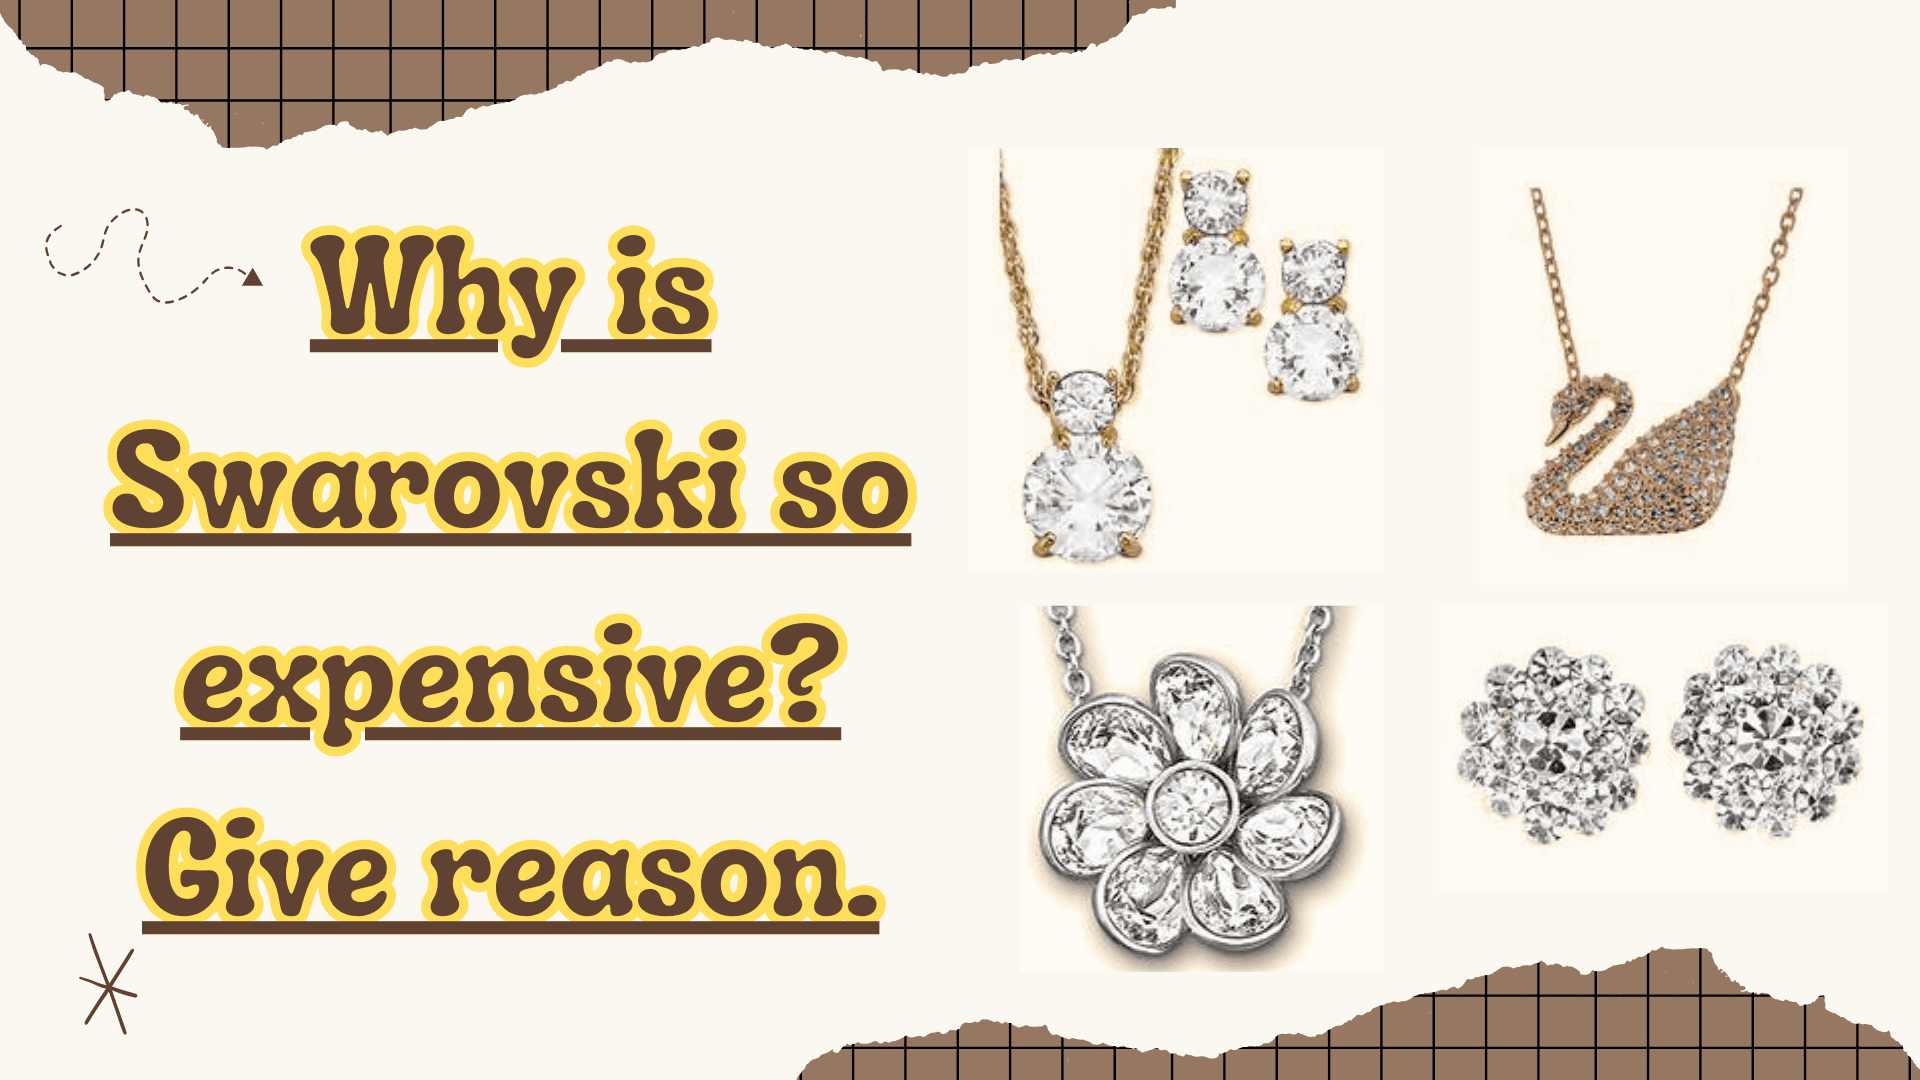 Why is Swarovski so expensive? Give reason.